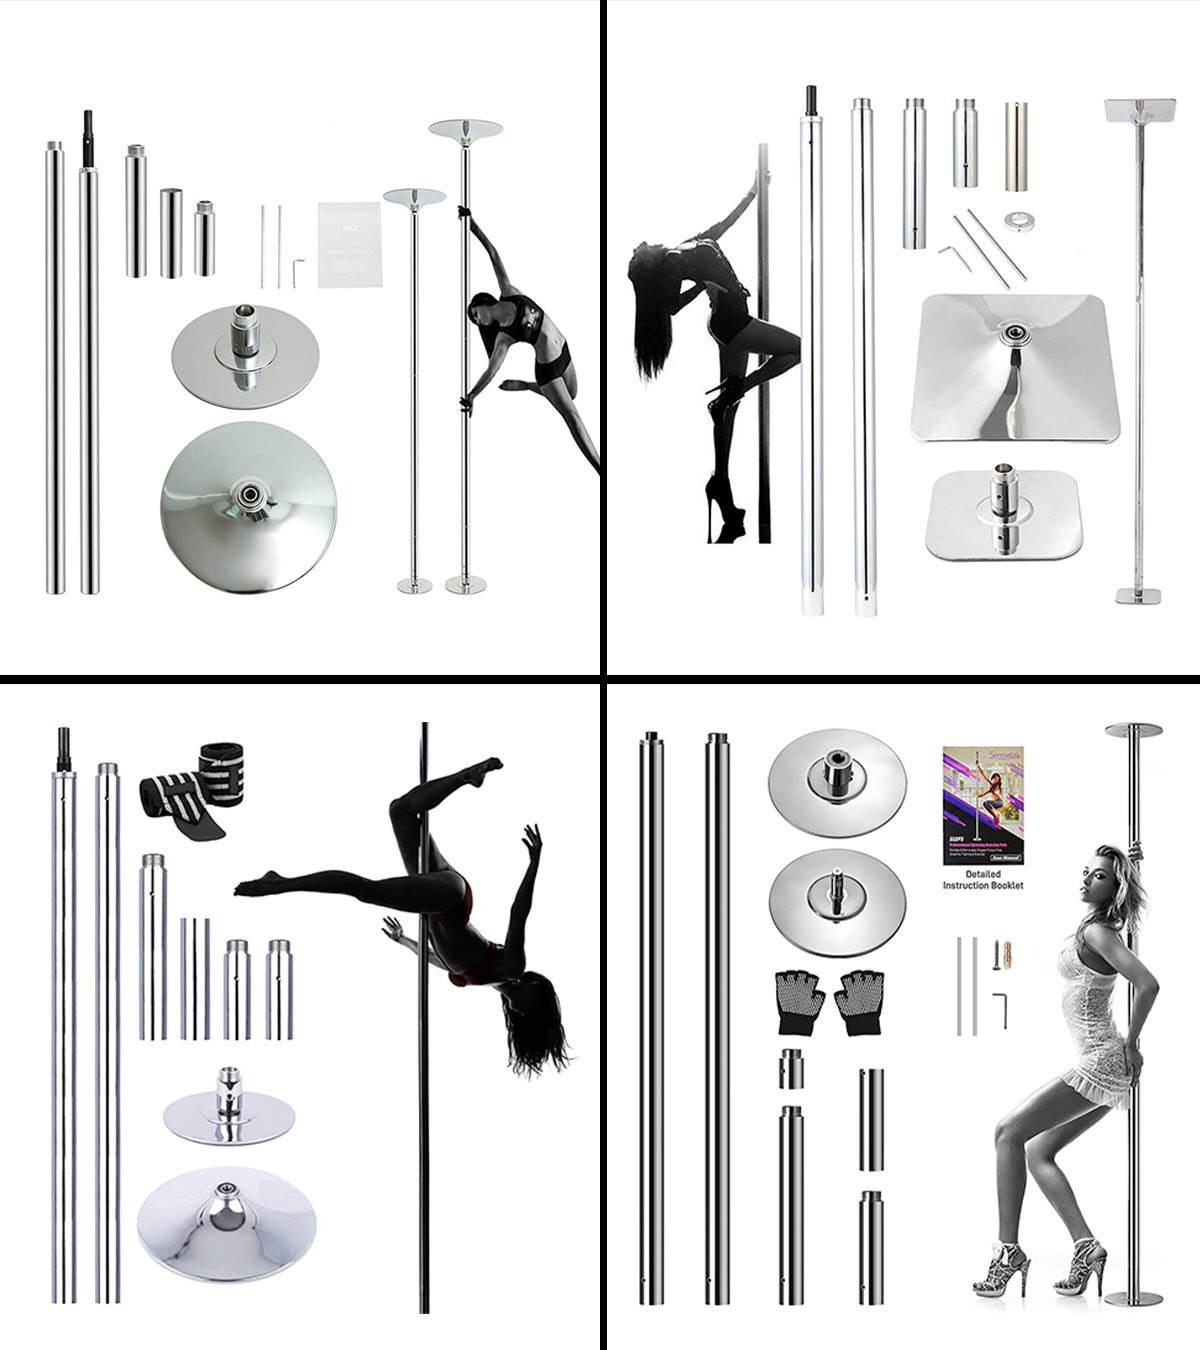 Home Dancing Pole Kit 45mm Load Capacity 440 Lb for Fitness Exercise 